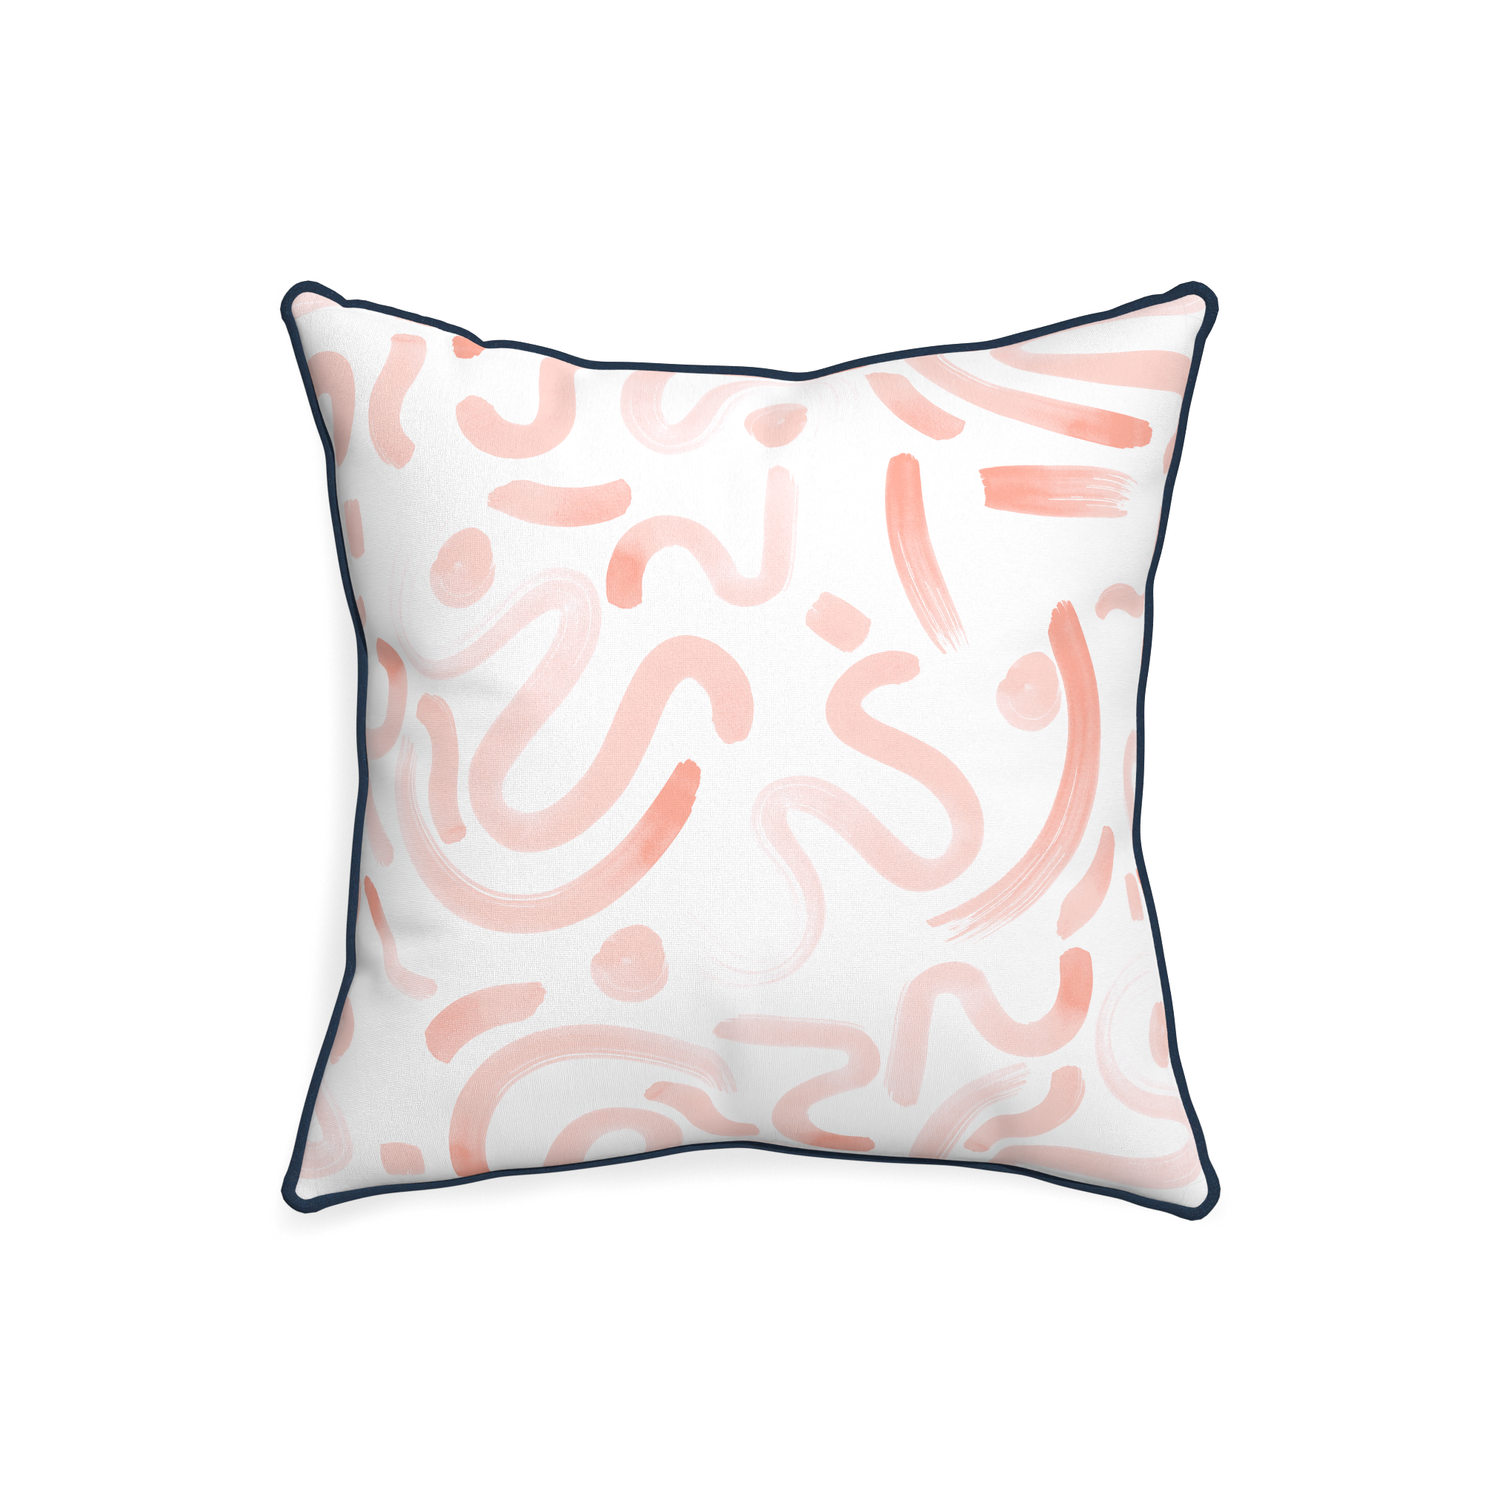 20-square hockney pink custom pink graphicpillow with c piping on white background